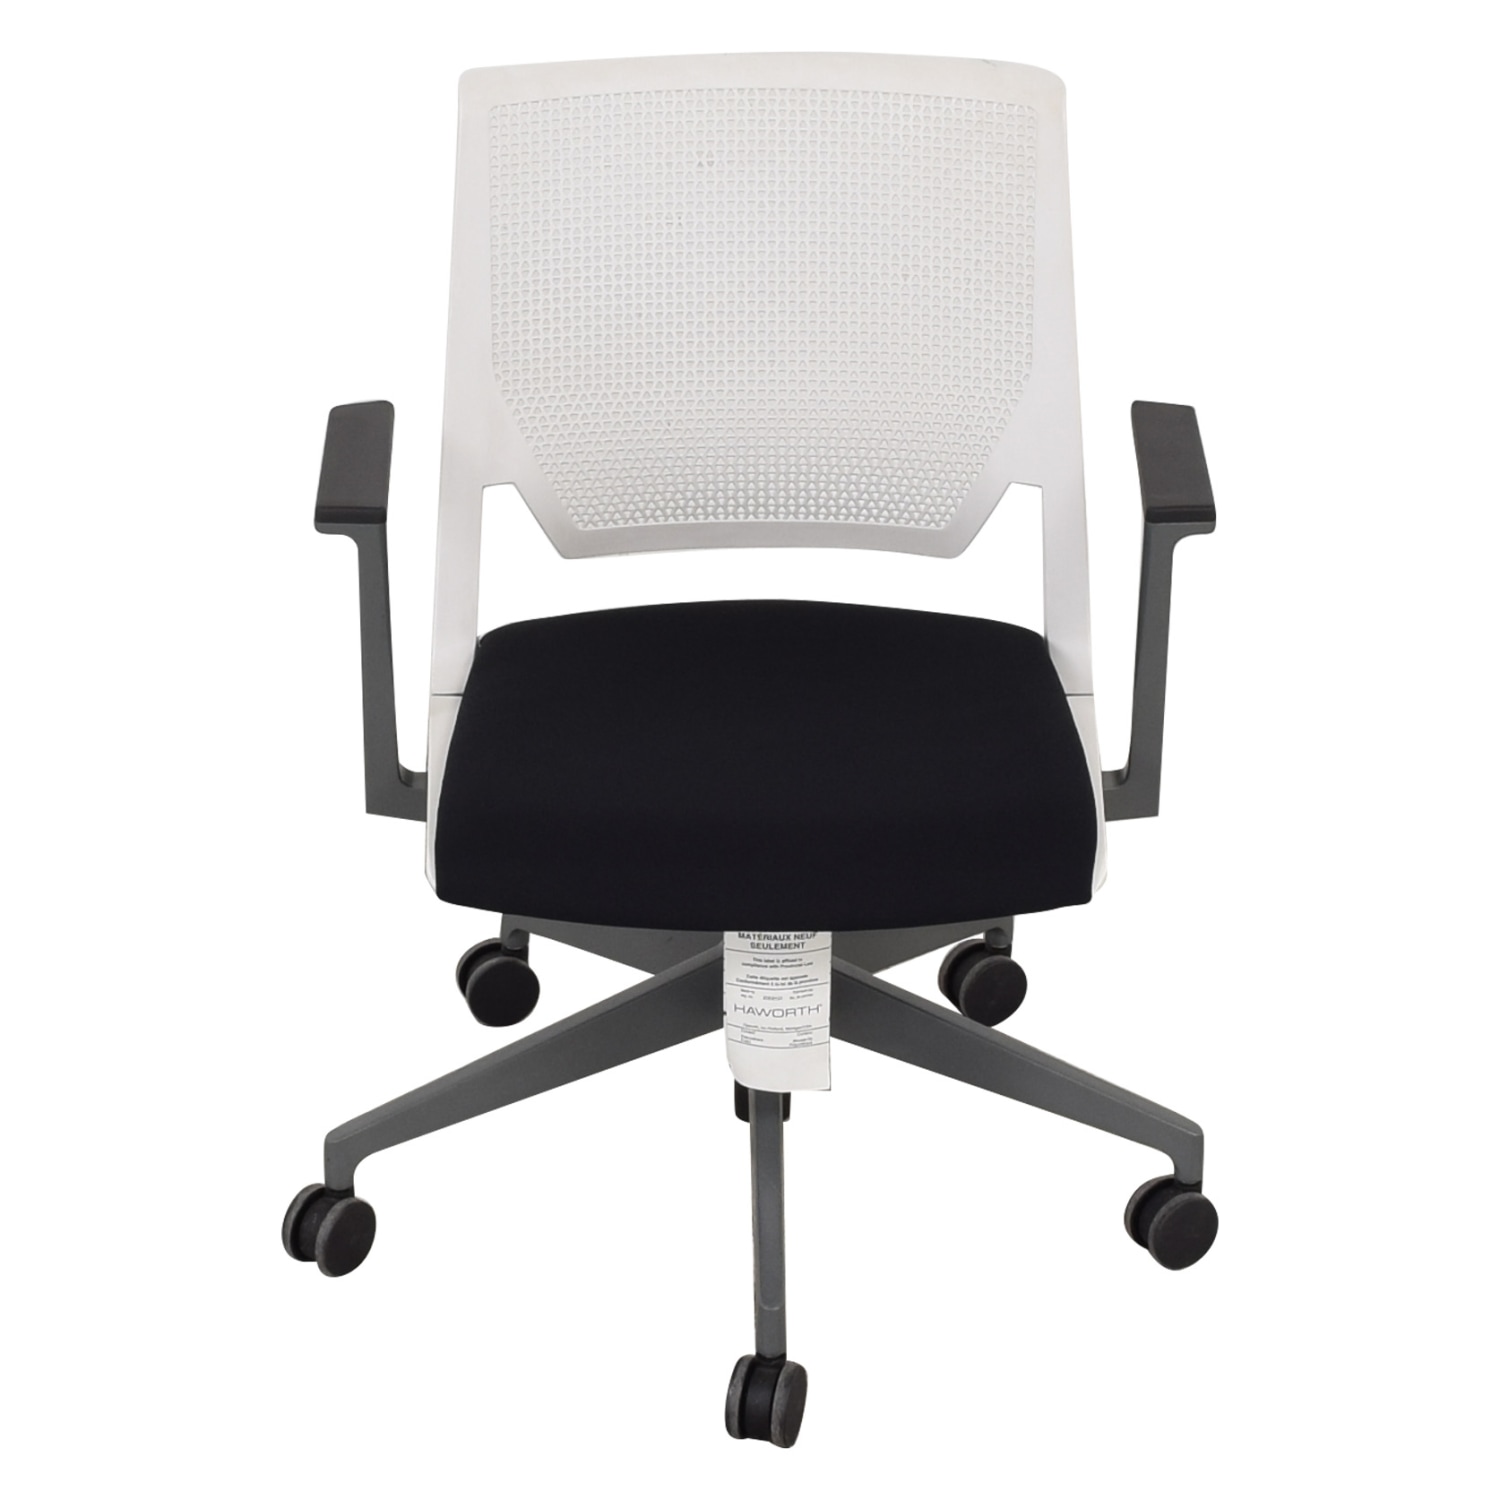 https://res.cloudinary.com/dkqtxtobb/image/upload/f_auto,q_auto:best,w_1500/product-assets/104617/haworth/chairs/home-office-chairs/haworth-very-conference-chair-with-arms-second-hand.jpeg